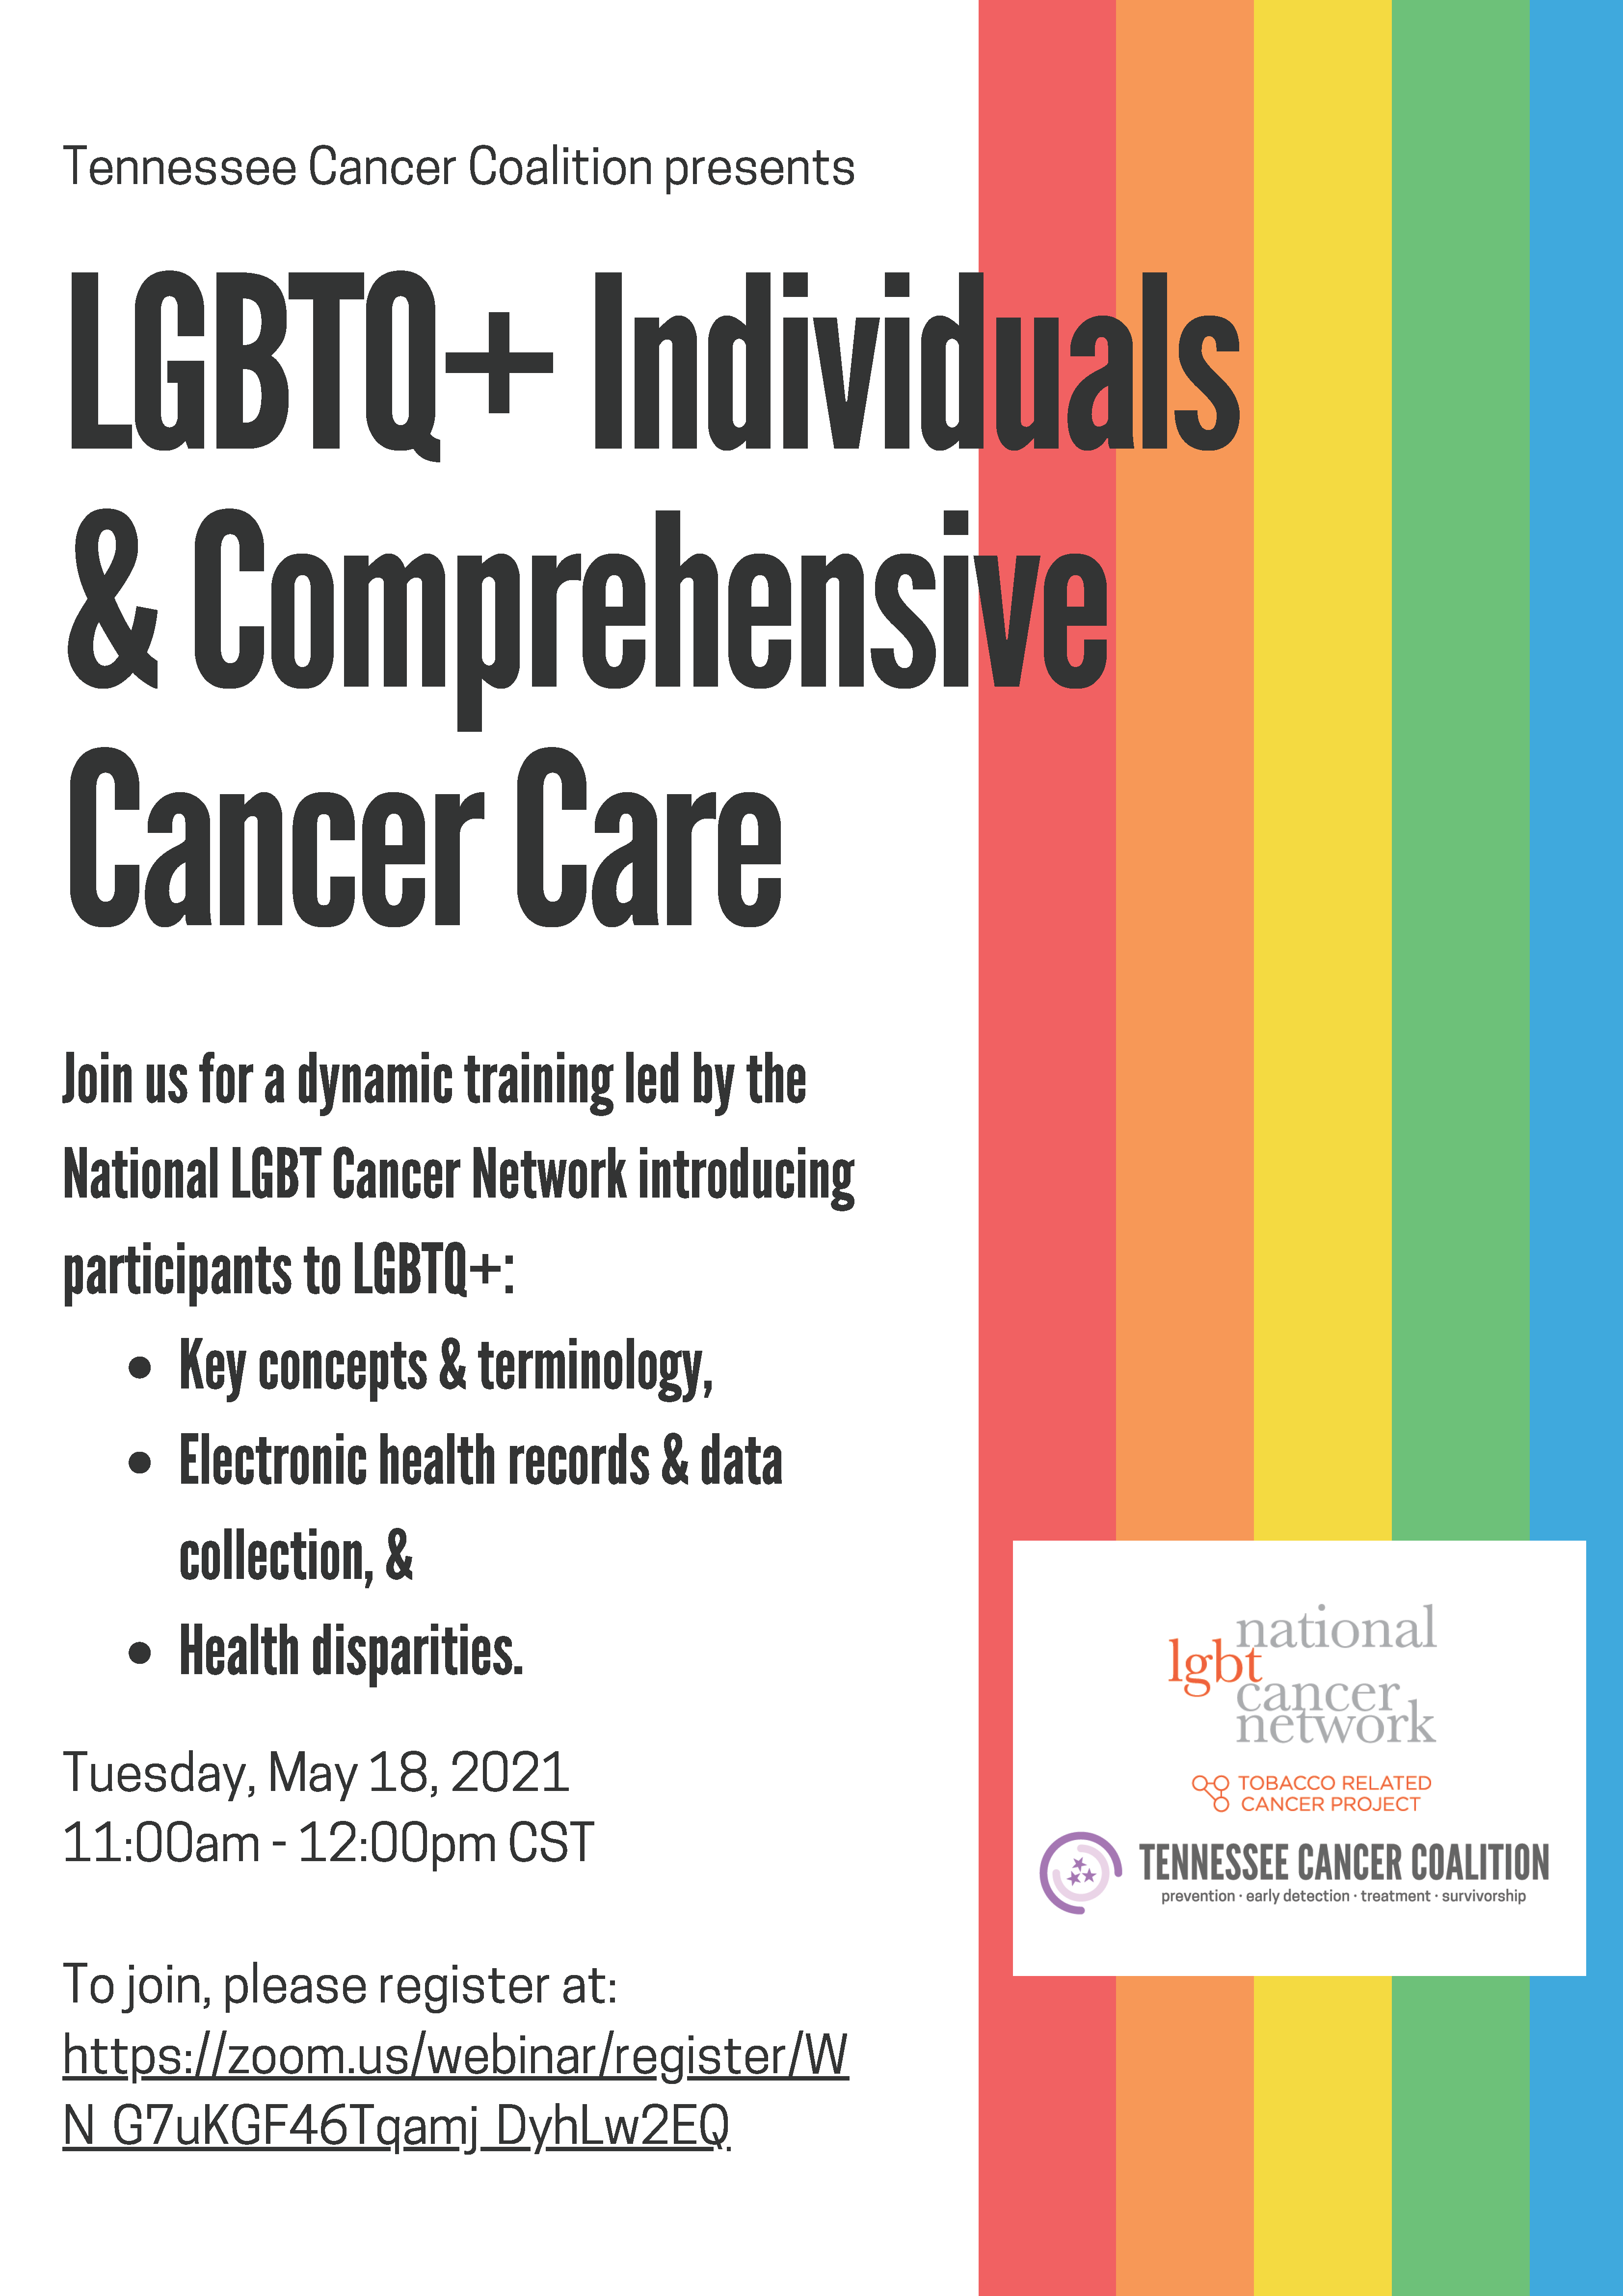 Cancer prevention for LGBTQ+ individuals